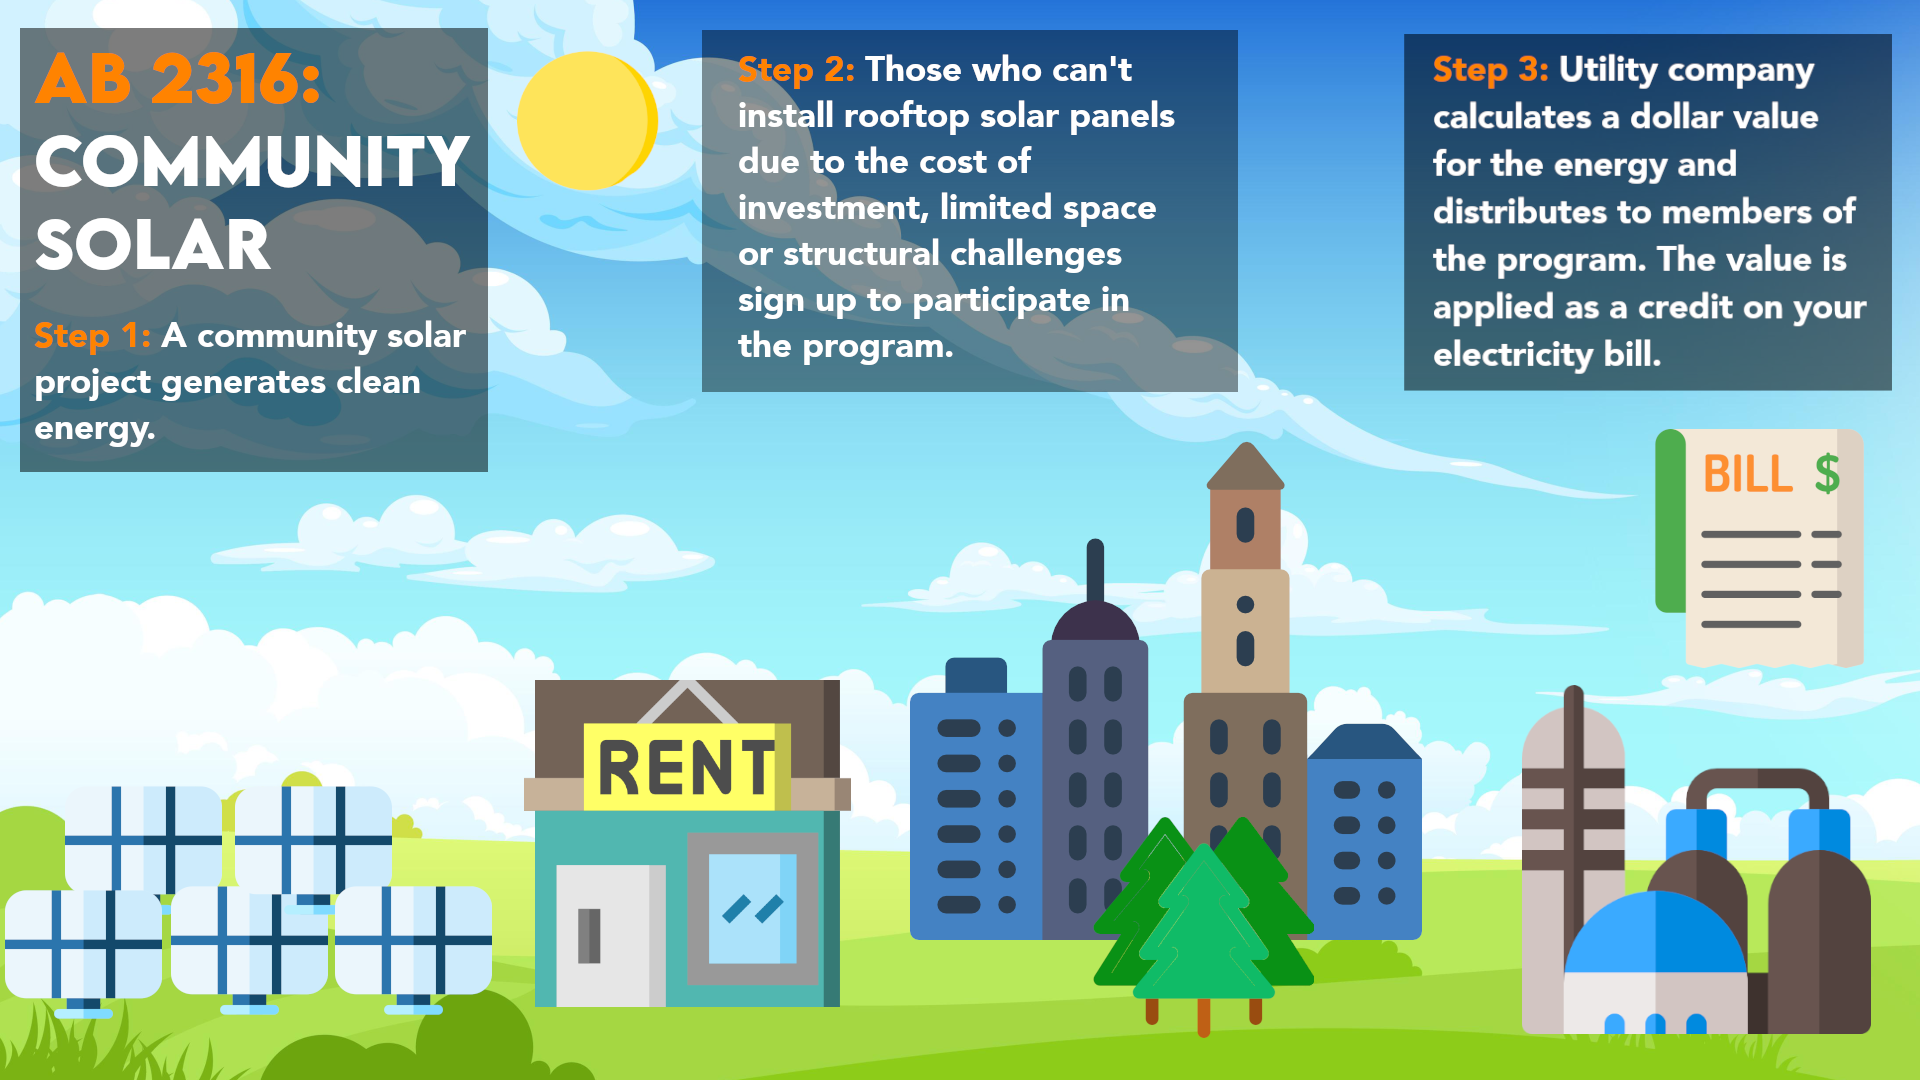 Infographic showing benefits of community solar projects